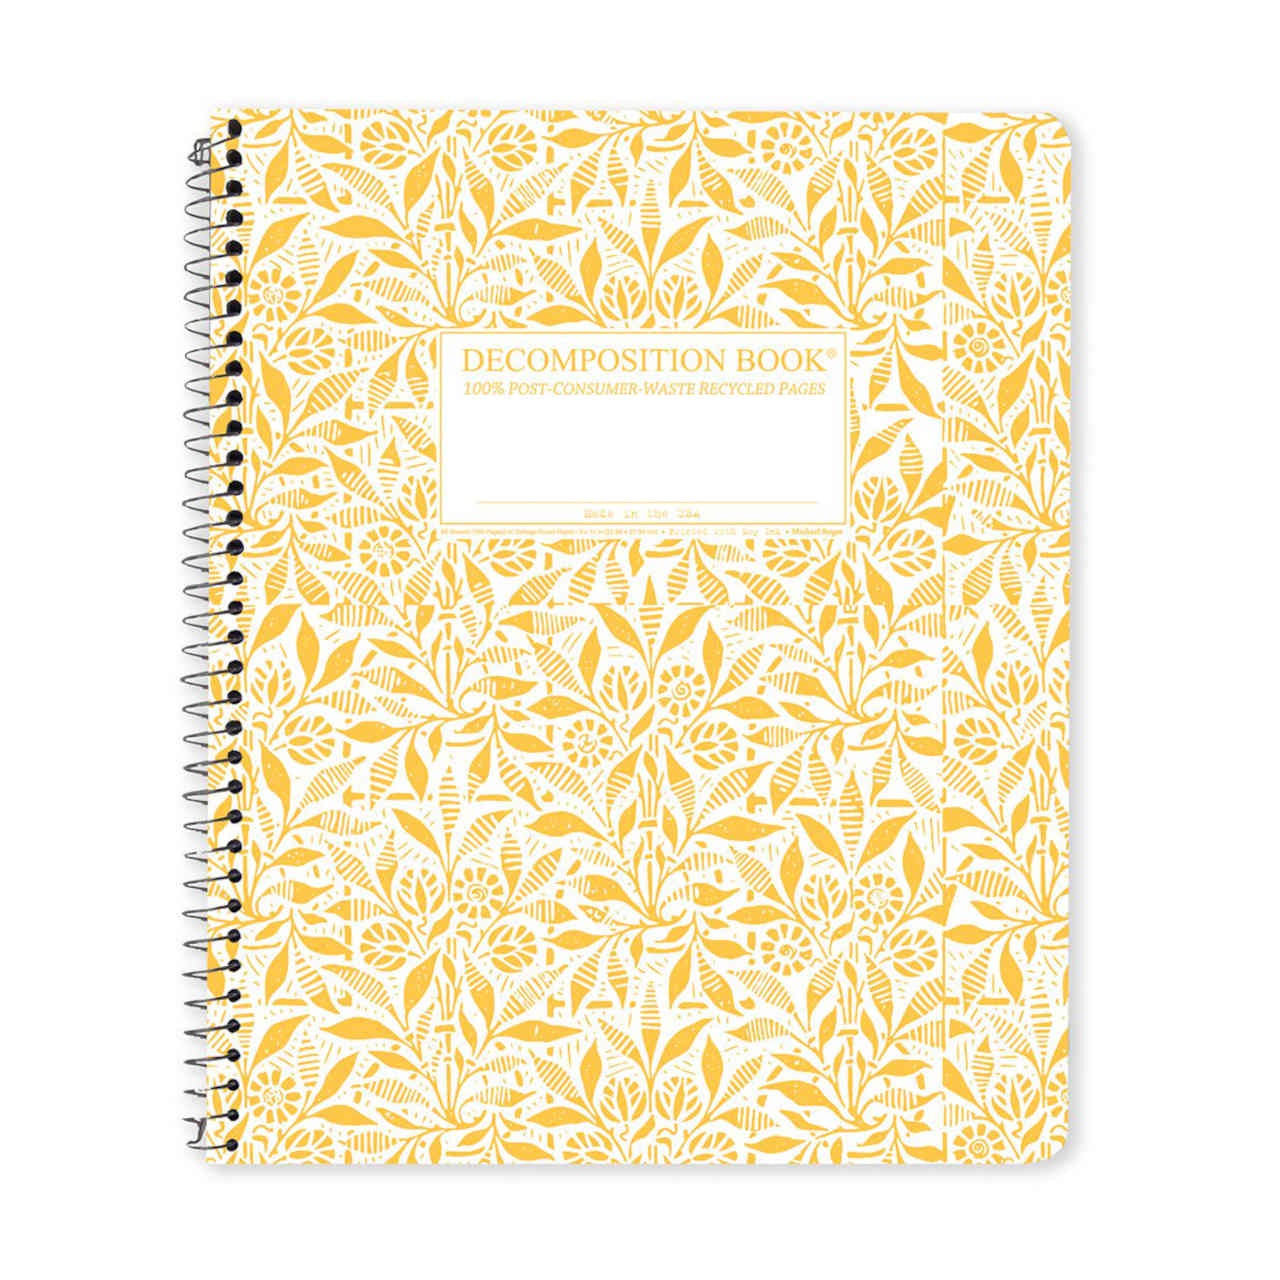 Decomposition Book - Extra Large Notebook - Ruled - Fields of Plenty